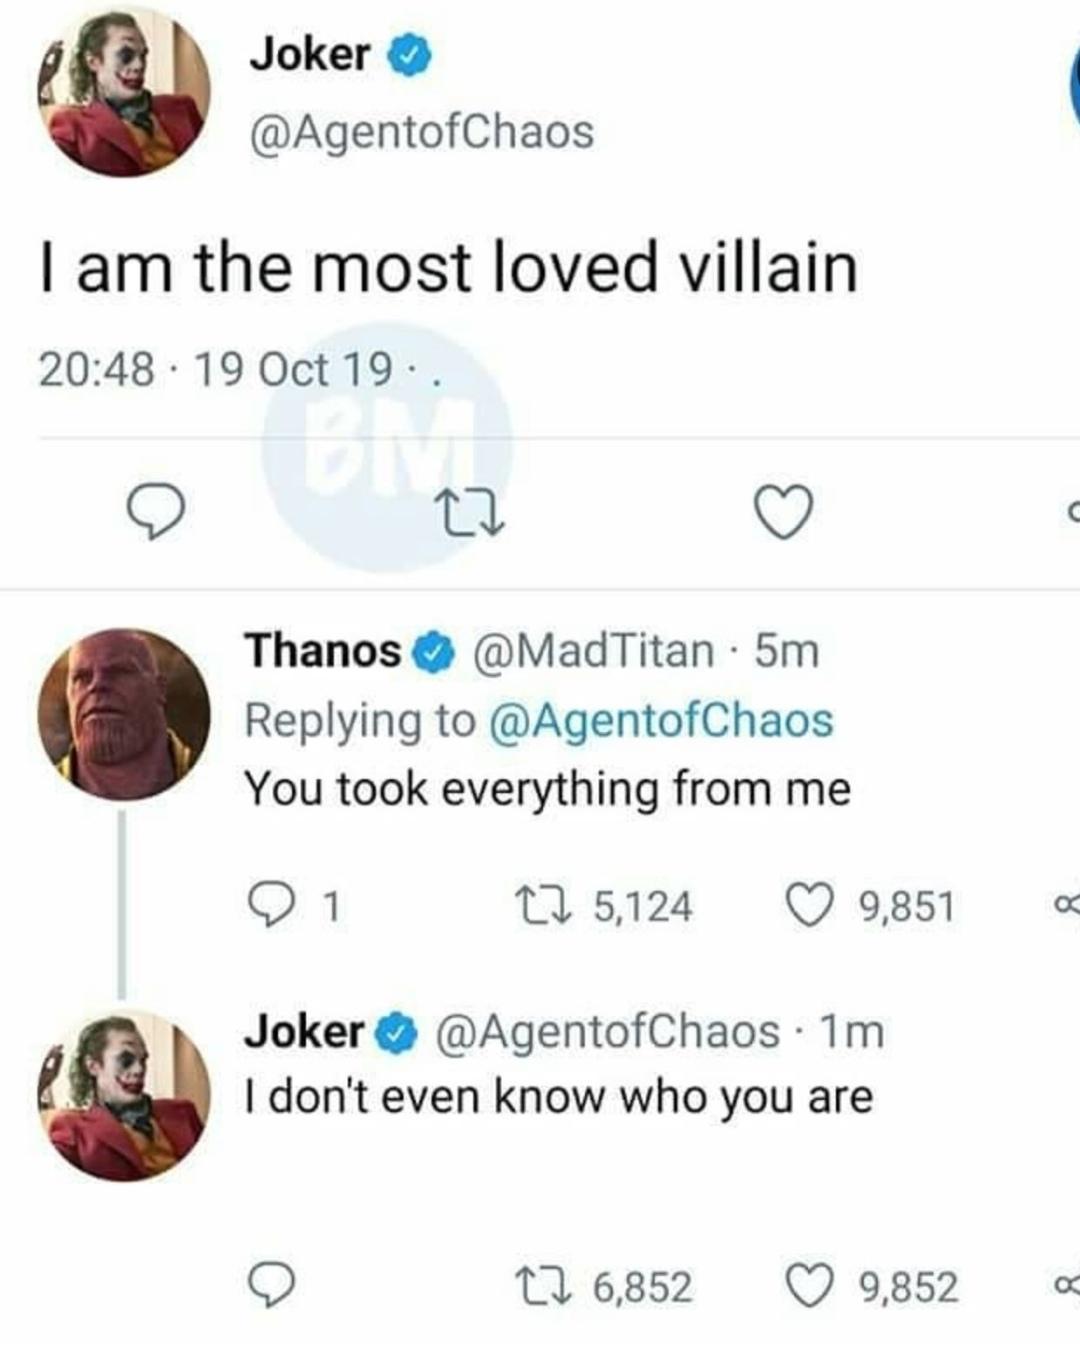 thanos avengers-memes thanos text: Joker @AgentofChaos I am the most loved villain 20:48 • 19 Oct 19 • Thanose @MadTitan • 5m Replying to @AgentofChaos You took everything from me 01 5,124 0 9,851 Joker e @AgentofChaos • 1m I don't even know who you are 6,852 0 9,852 